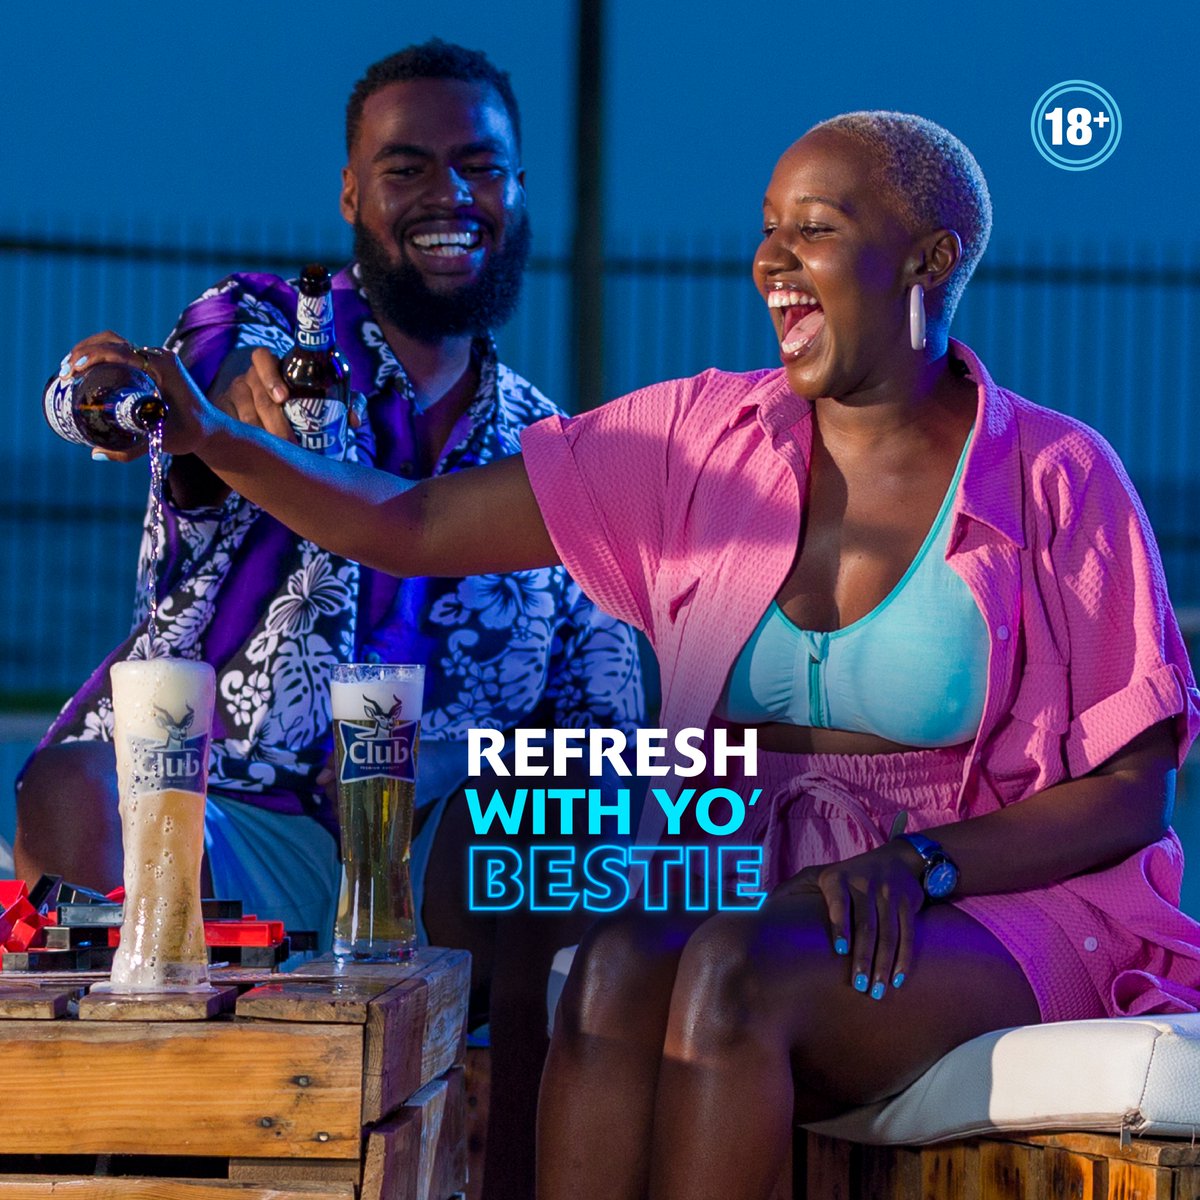 A cold one with yo' bestie hits different. 🍻

#RefreshinglyDifferent